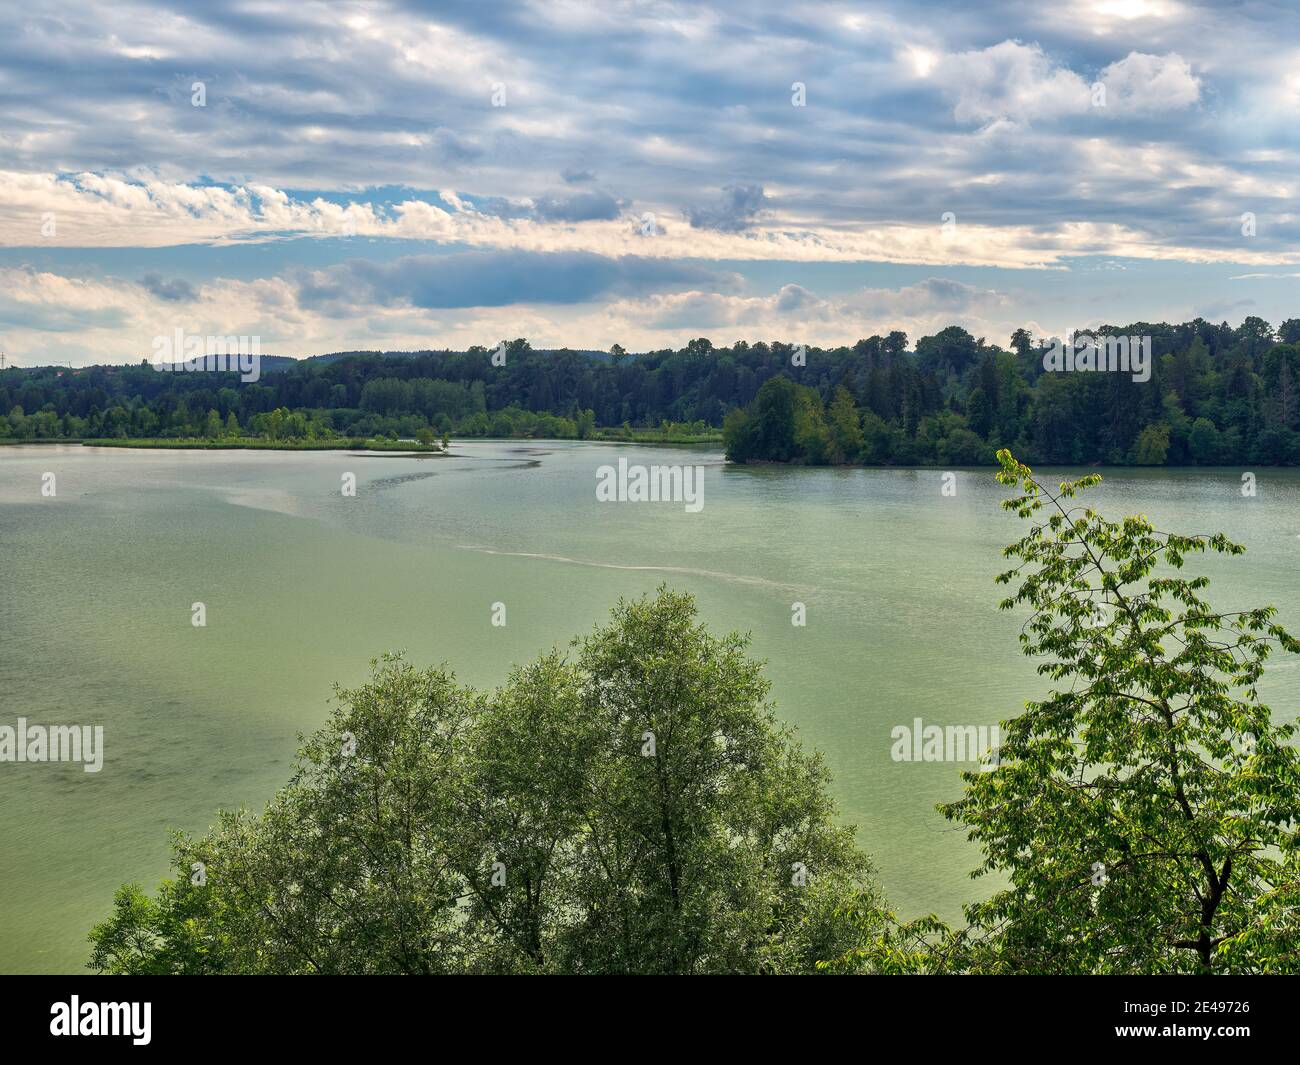 Lech, river, reservoir, dammed, trees, alluvial forest, vision, Pfaffenwinkel, river bend, curve, current, channel-like, energy supply, viewpoint Stock Photo